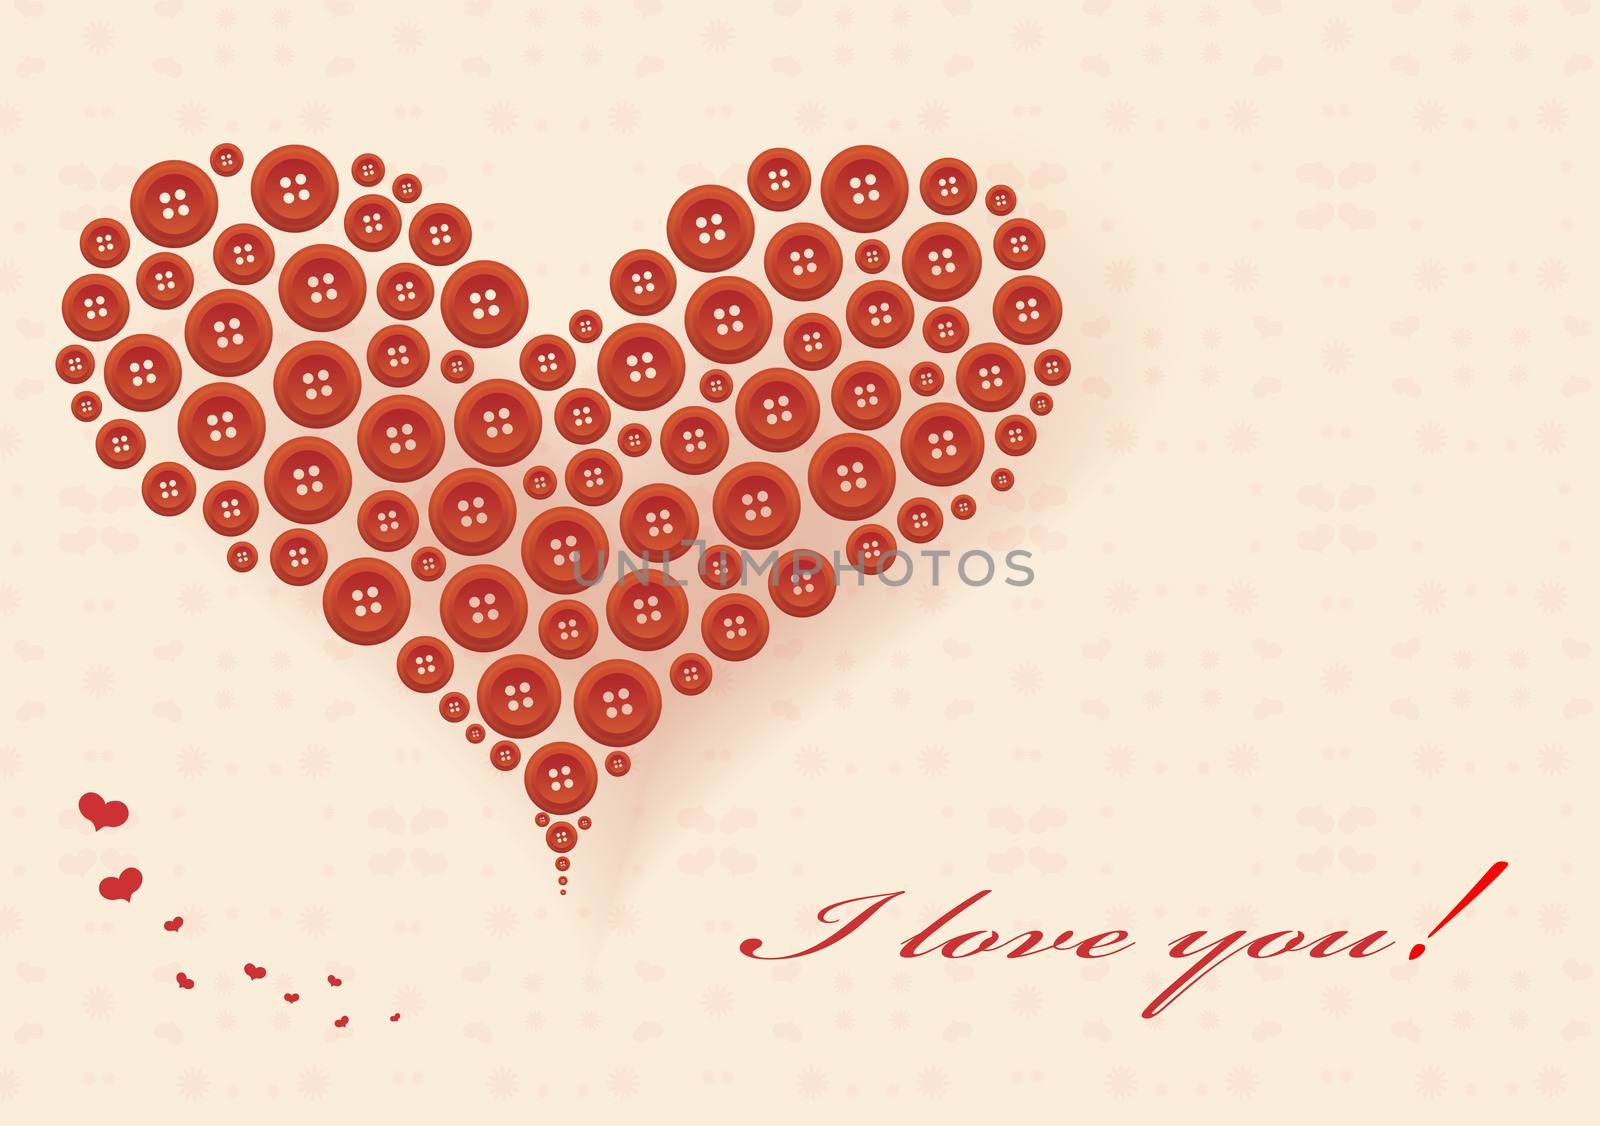 Stylized heart made of red buttons. Greeting card for Valentine's Day.